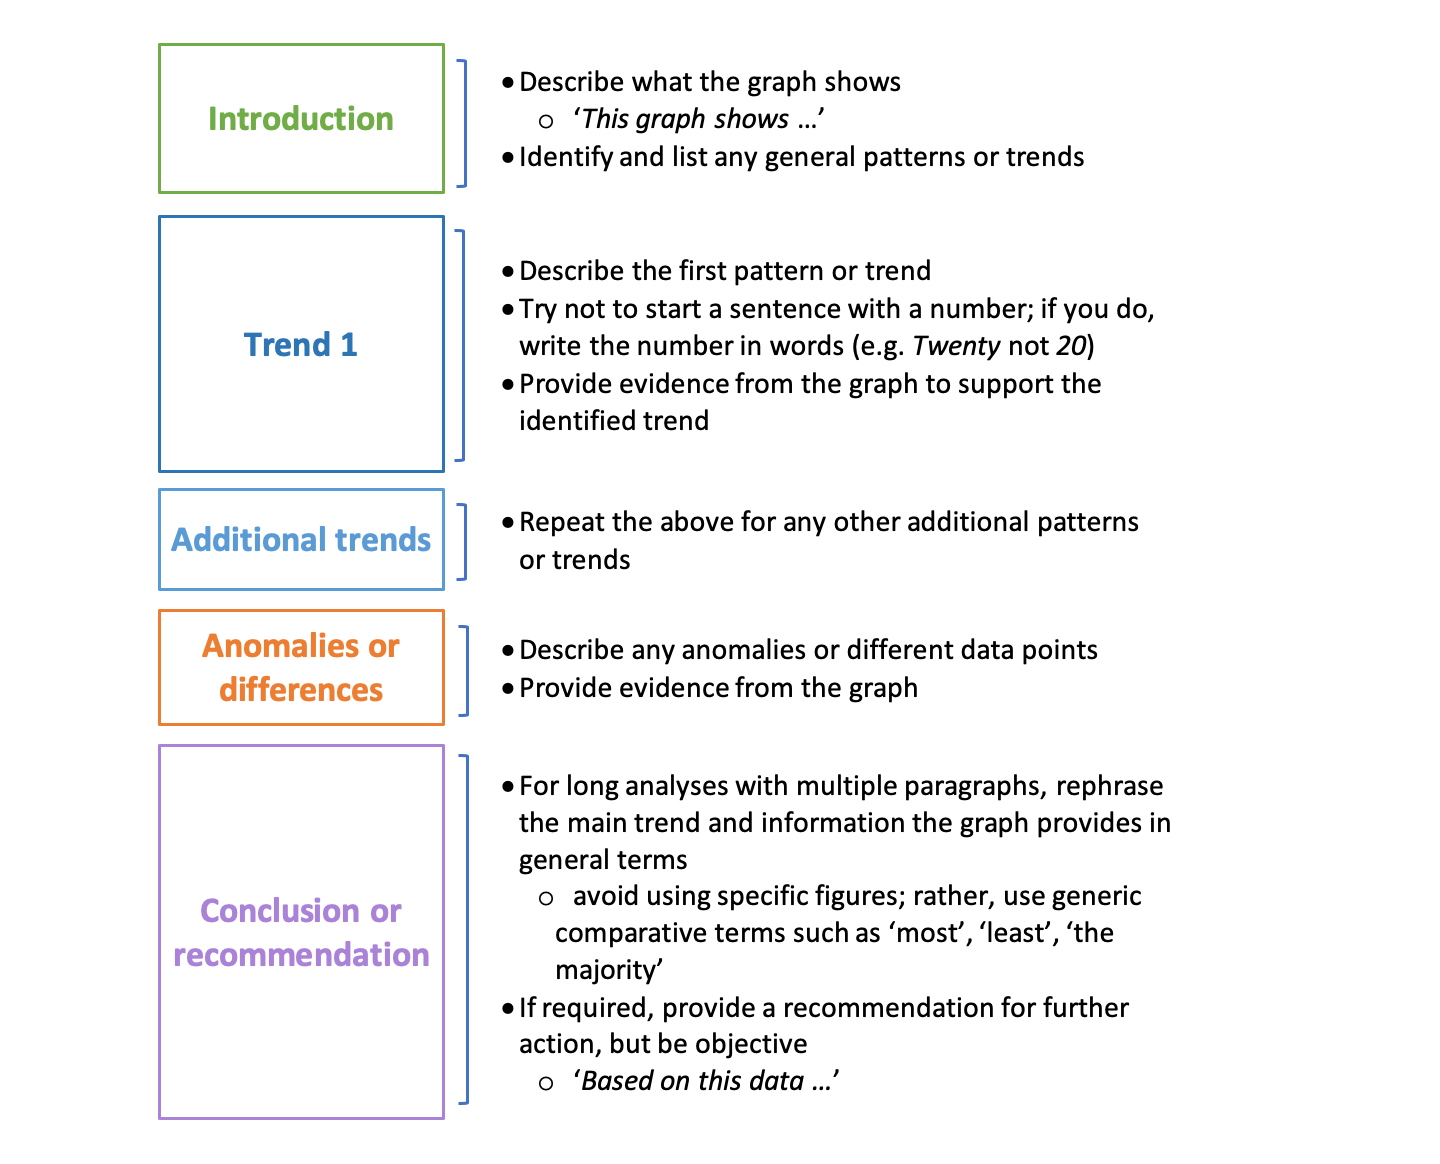 a framework to support students to analyse graphs. It suggests a written analysis of a graph follows the following sequence: introduction, trend 1, additional trends, anomalies or differences, conclusion or recommendation. For each section, instructions are given to explain what the student should write. For introduction: describe what the graph shows, identify any patterns or trends. For trend 1: describe the trend or pattern, provide evidence from the graph. This is repeated for additional trends. For anomalies or differences: describe the difference or anomaly and provide evidence from the graph. For conclusion or recommendations, students should rephrase the main trend and information the graph provides in general terms and, if required, provide a recommendation for further action.